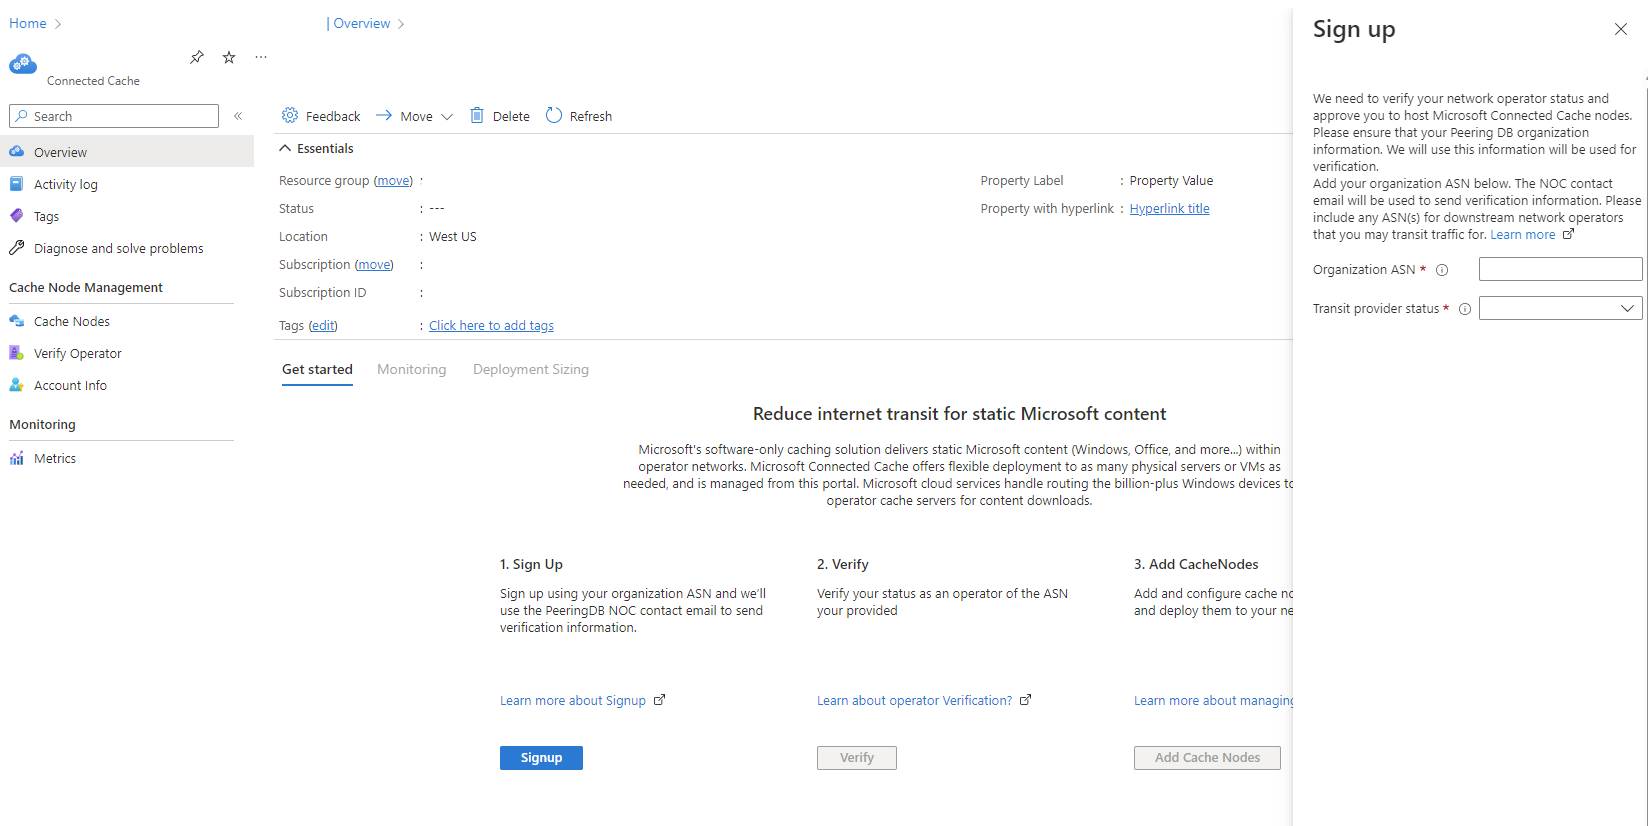 Screenshot of the sign up page in the Microsoft Connected Cache resource page in Azure portal.